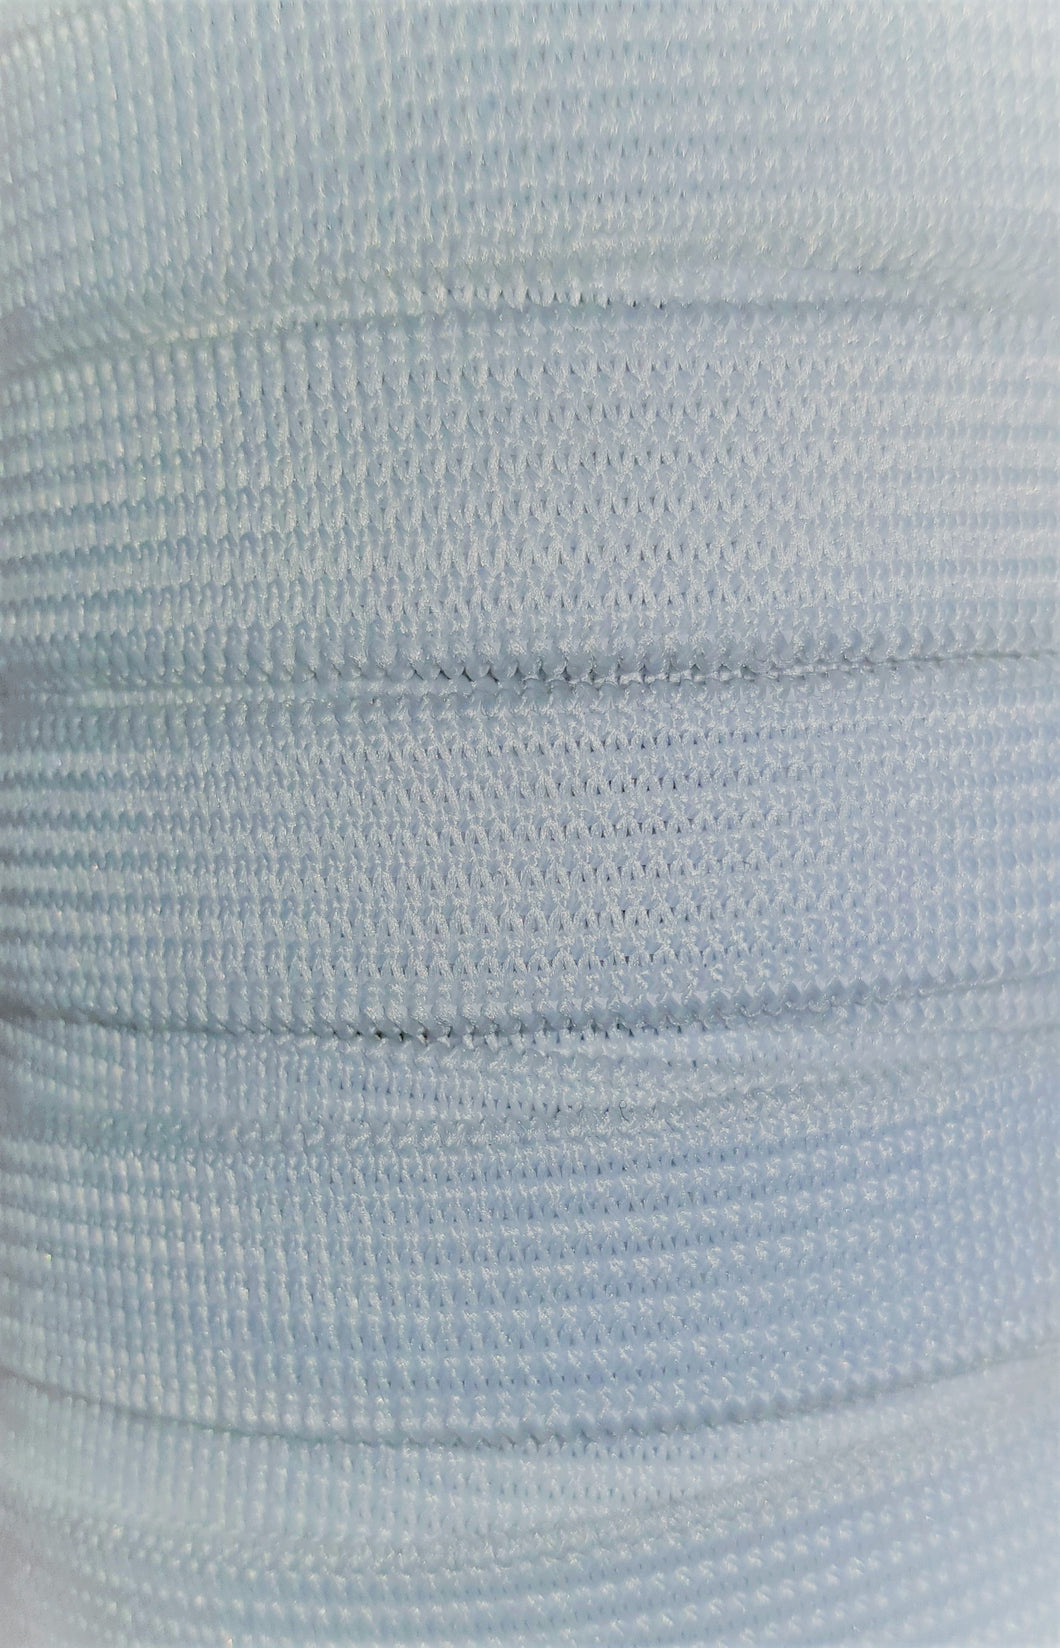 13mm White Elastic Knitted 100m